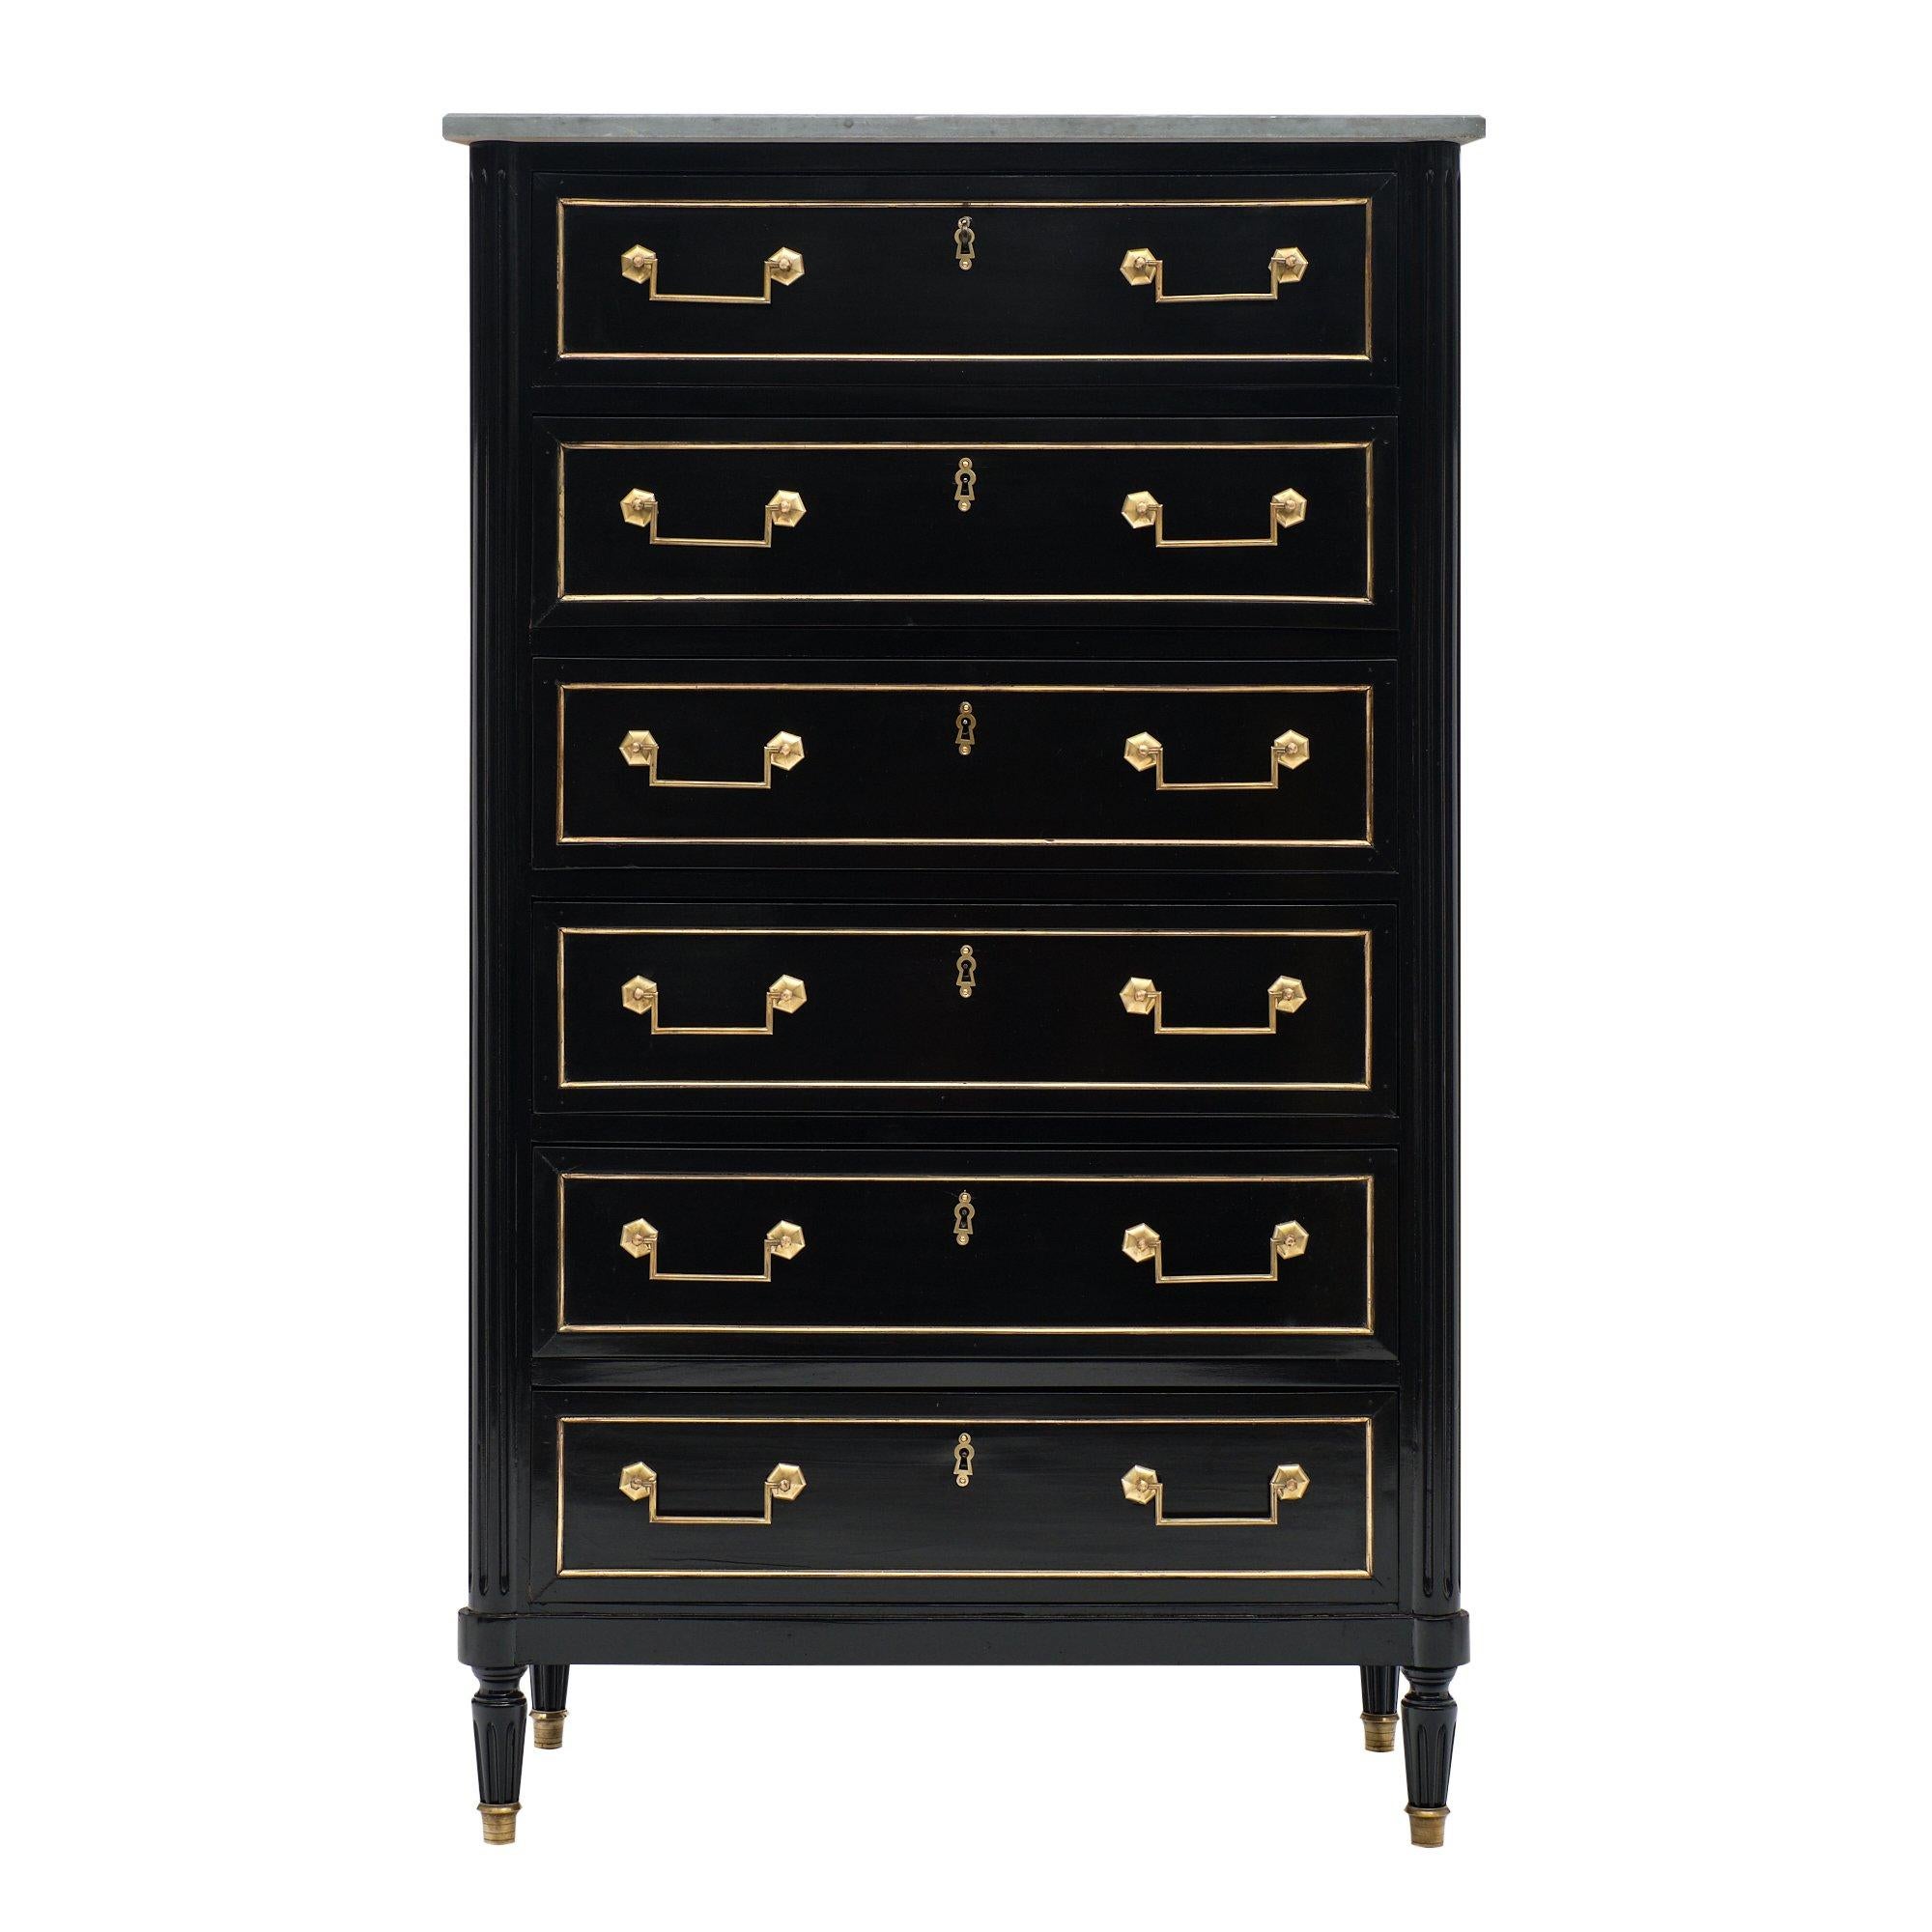 Louis XVI style semainier with gray Sainte Anne marble top and an ebonized French polish finish. We love the original brass trim and hardware throughout. Six dovetailed drawers offer functionality. This piece is in excellent antique condition.